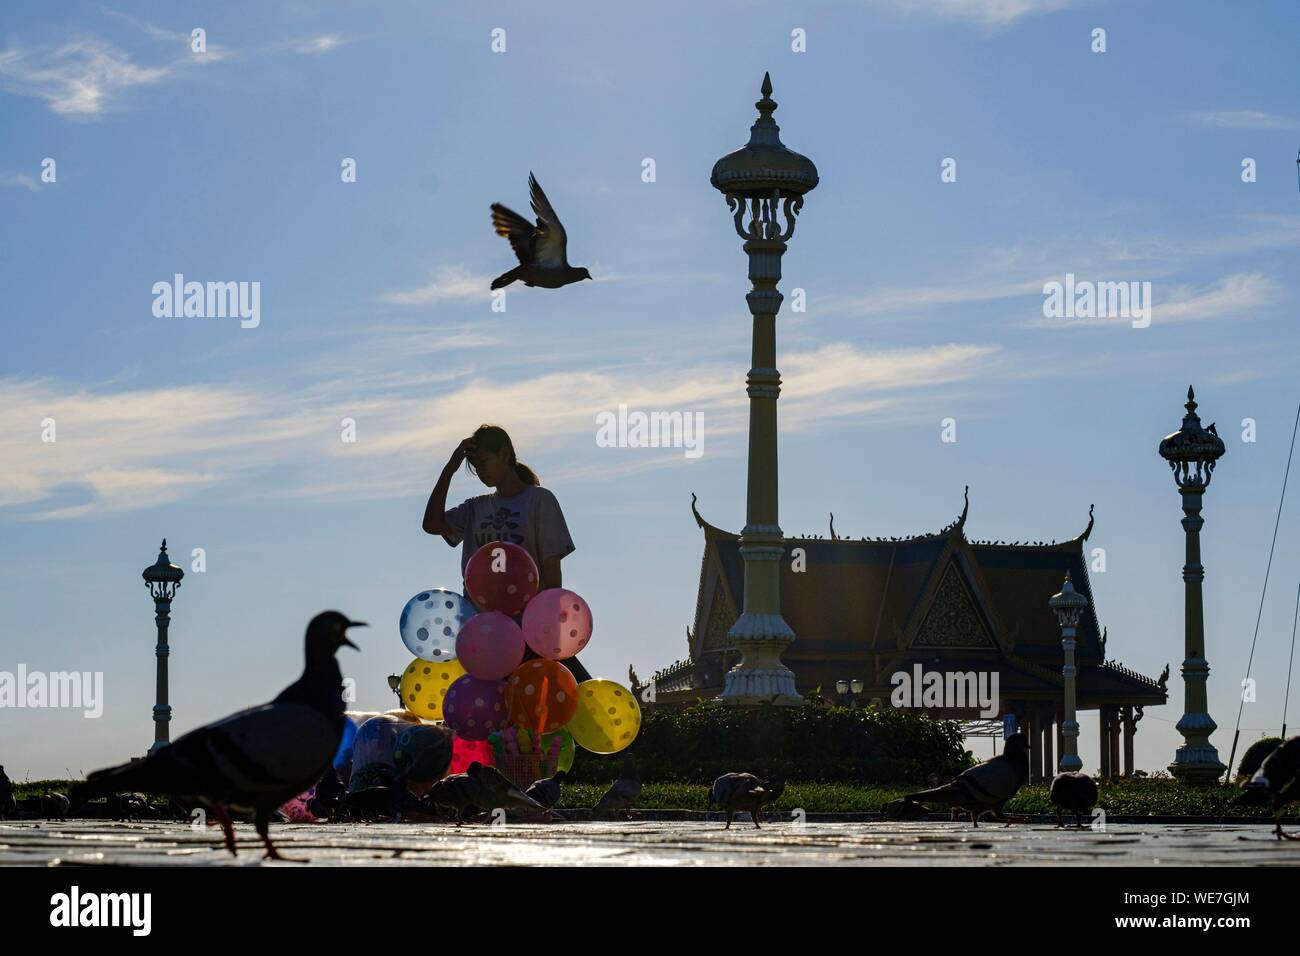 Cambodia, Phnom Penh, balloon seller in front of the Royal palace Stock Photo